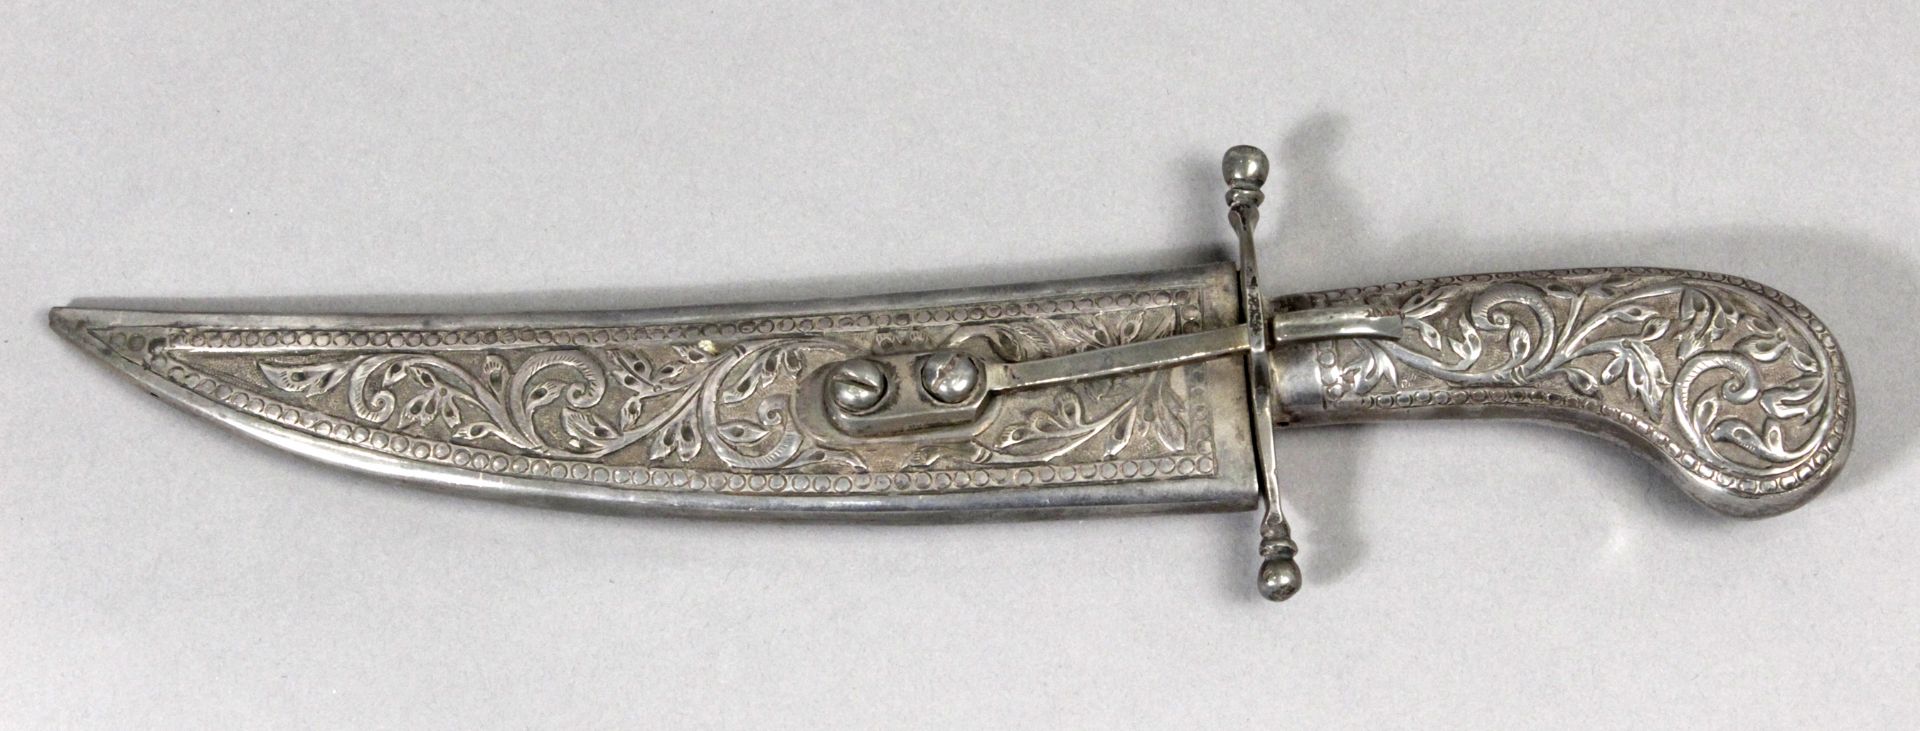 A first half of 20th century silver knife possibly from India